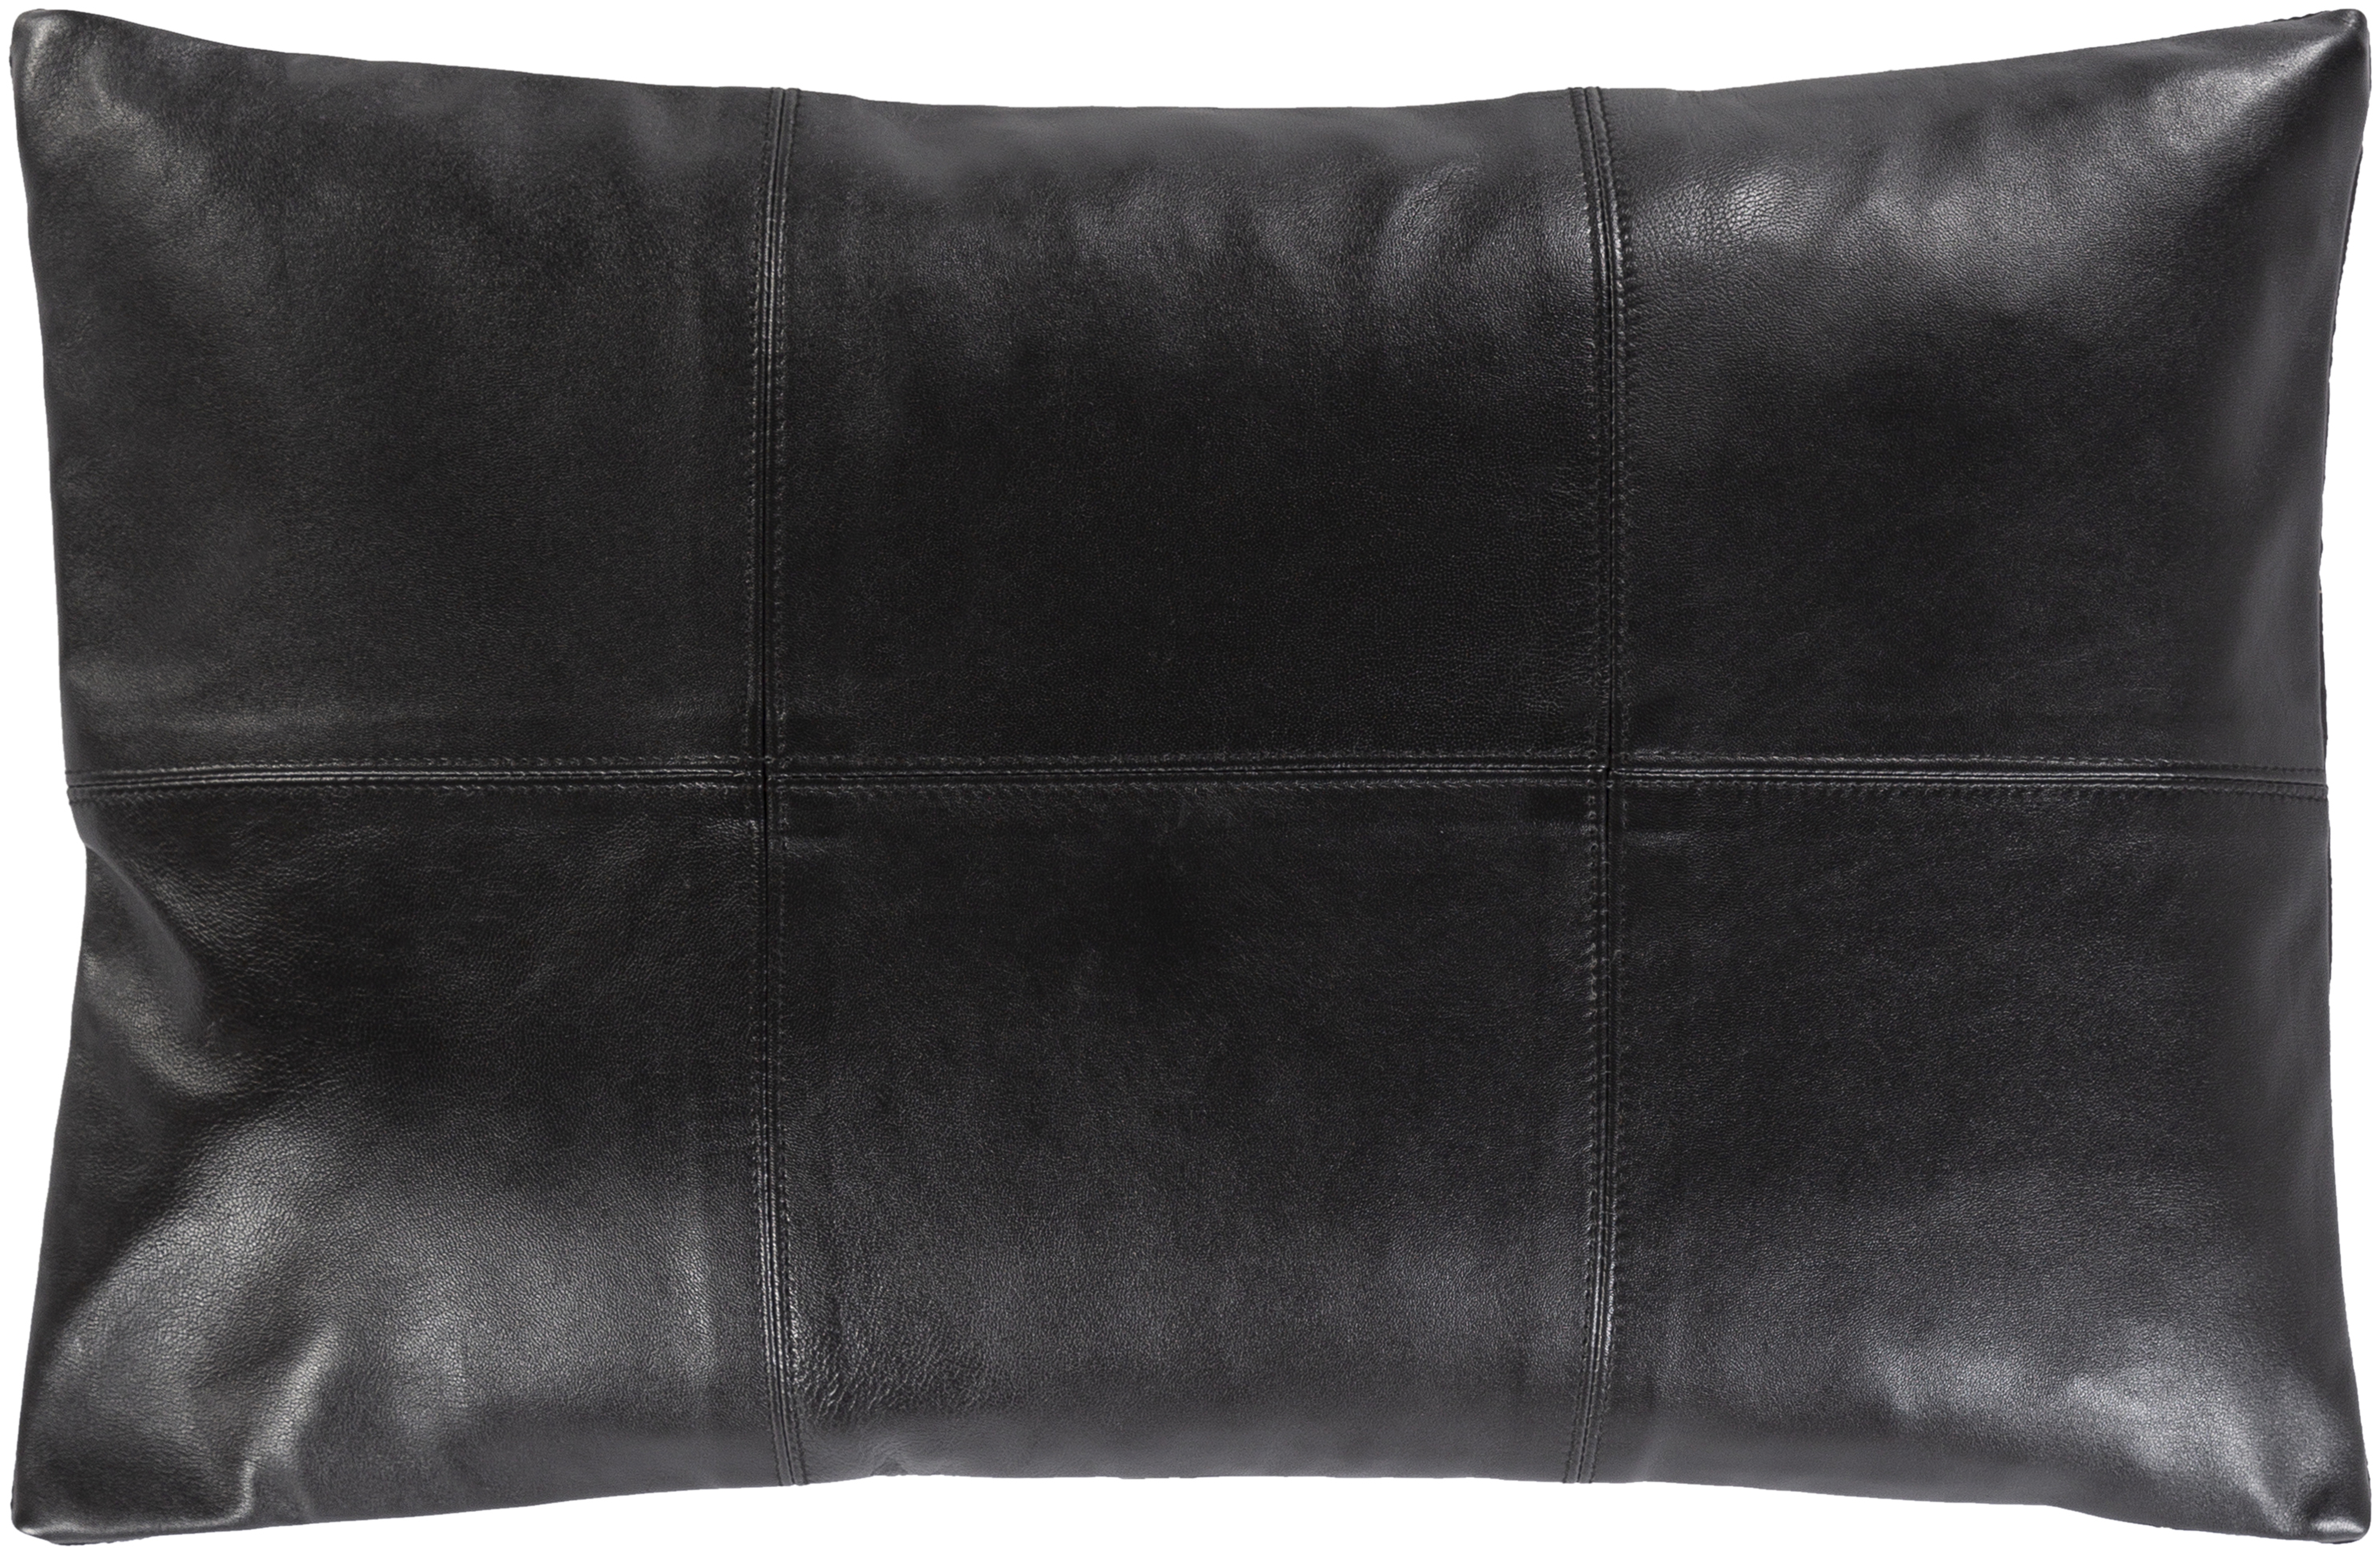 Onyx Throw Pillow, Small, pillow cover only - Surya